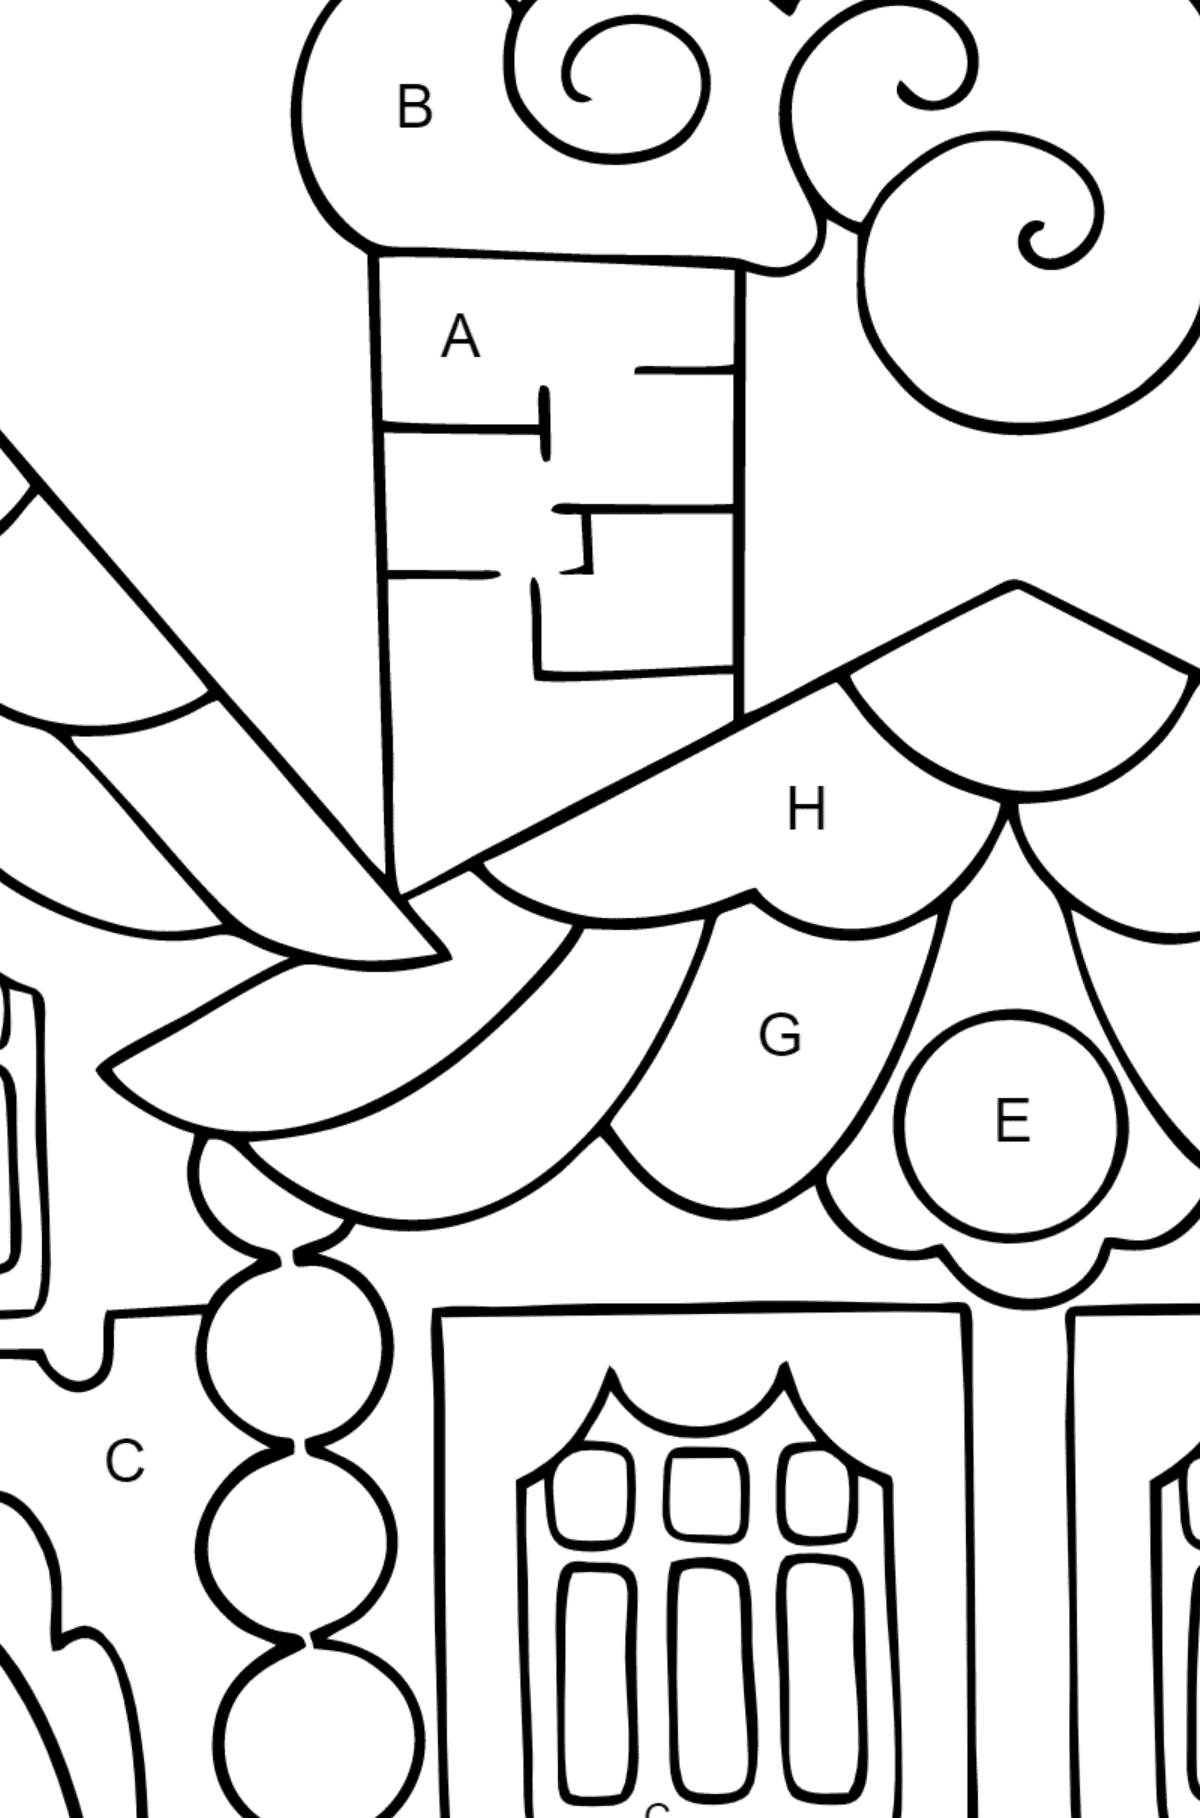 Simple Coloring Page - A House in the Forest - Coloring by Letters for Children